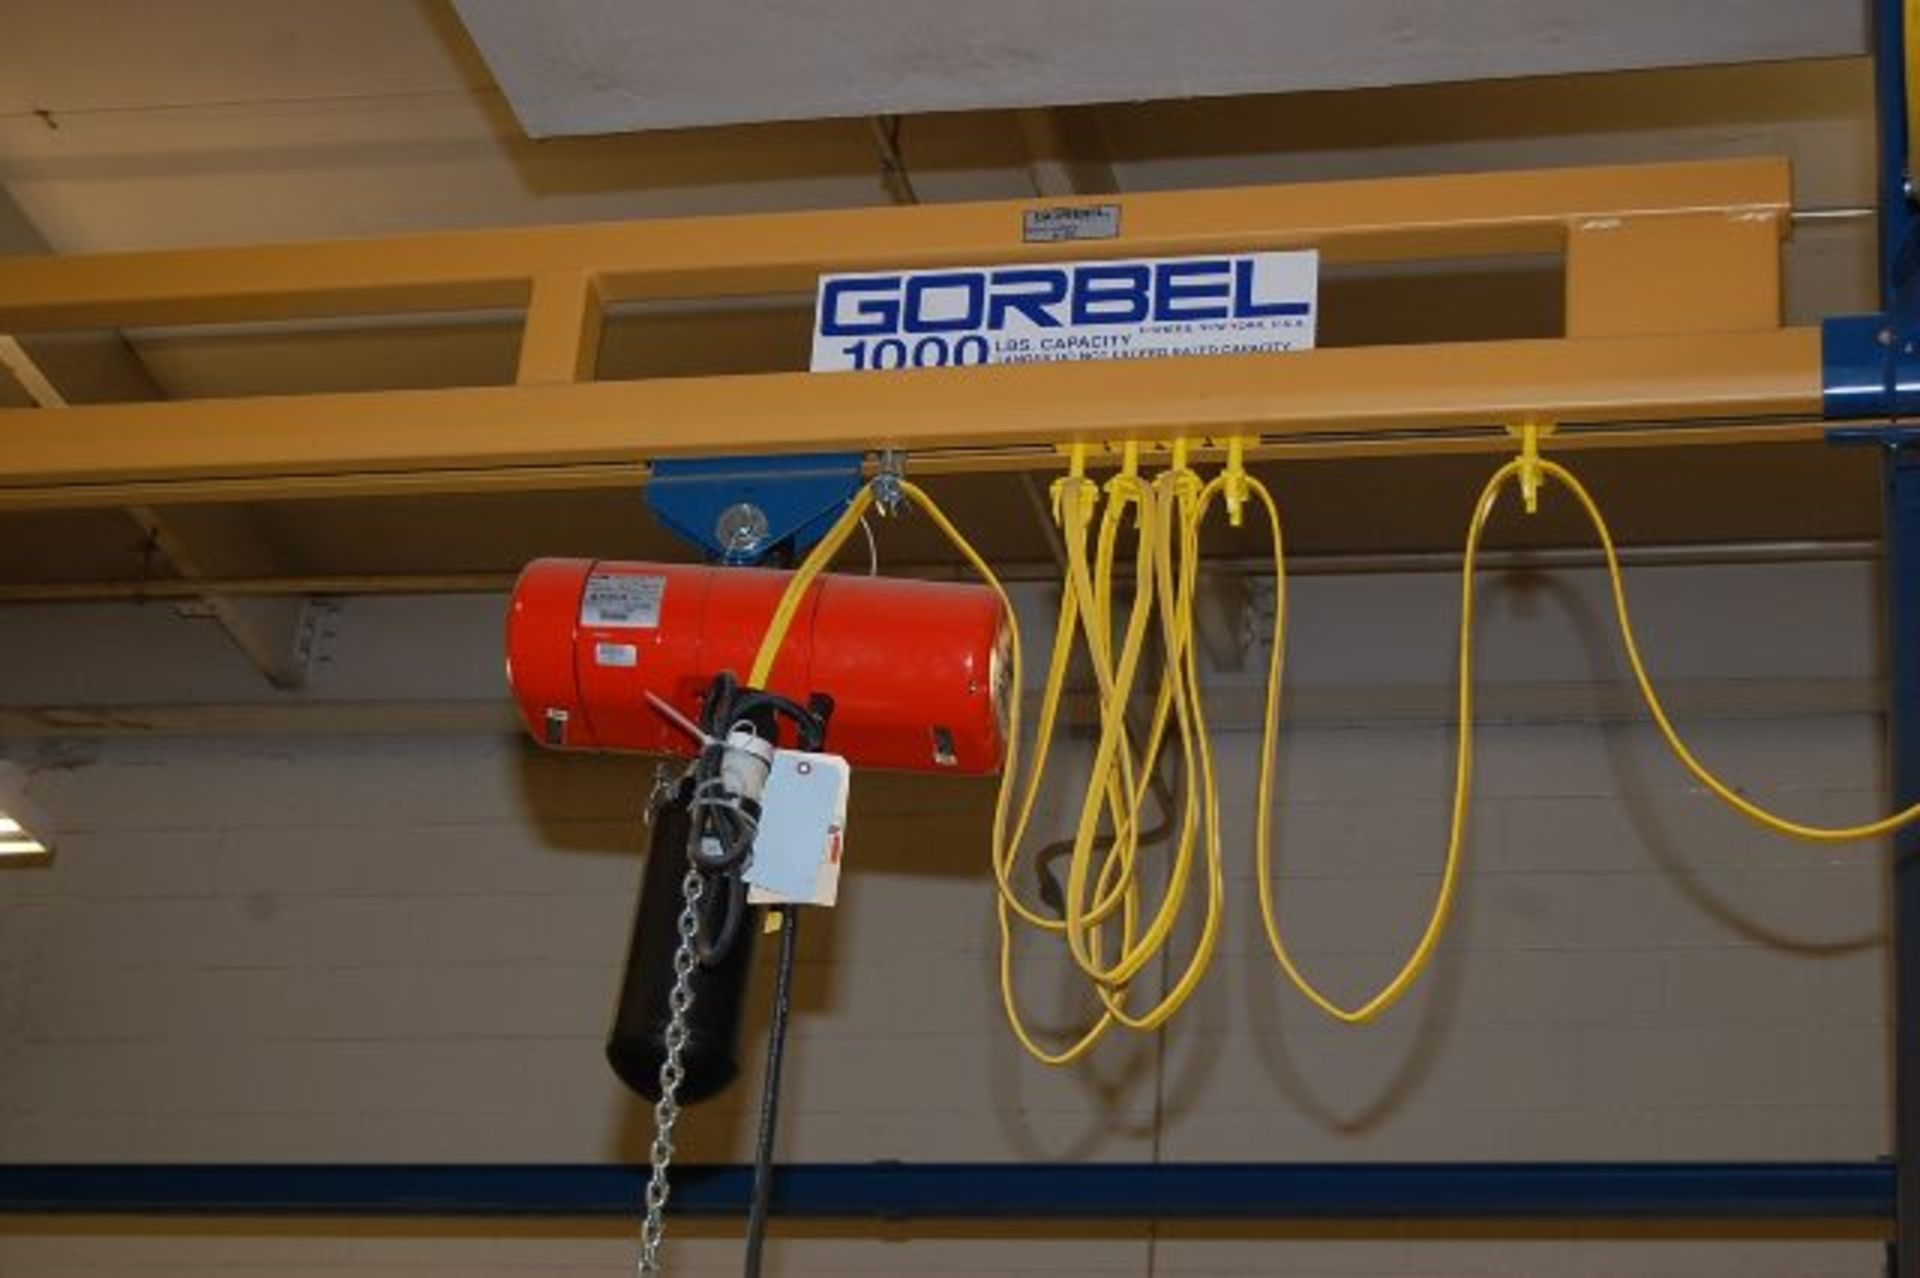 Gorbel Crane System, Self Supporting, Approx. 20 ft. Span x 20 ft. Runway, Rated 1000 lb. - Image 2 of 2